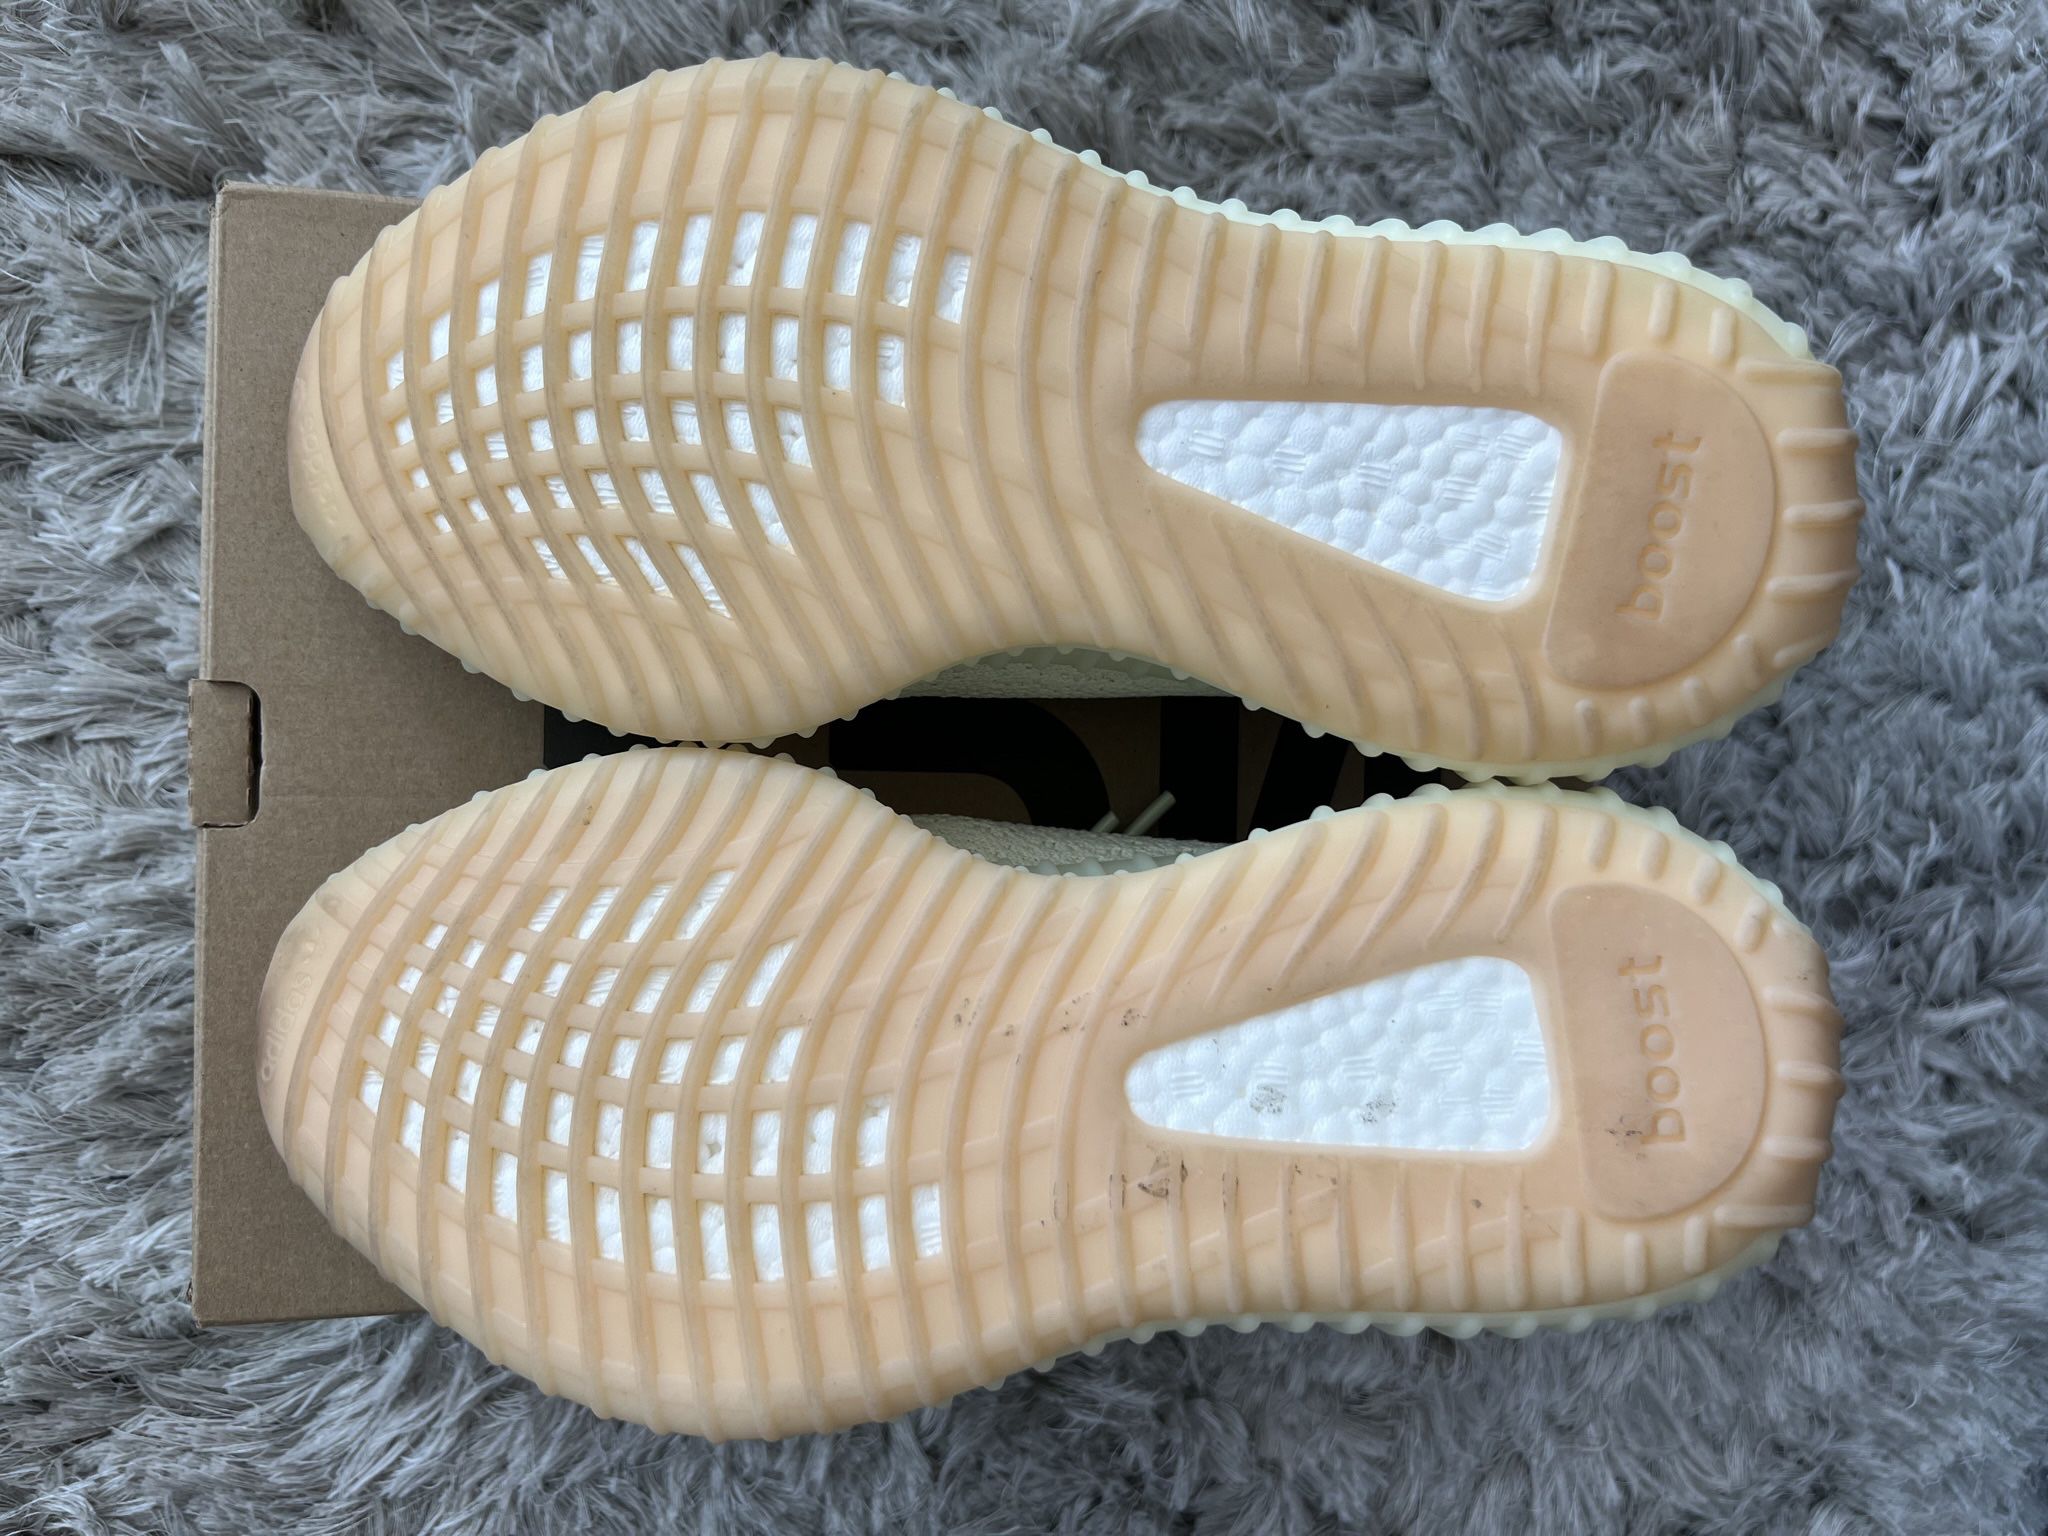 Adidas Yeezy 350 Butter Size 8.5